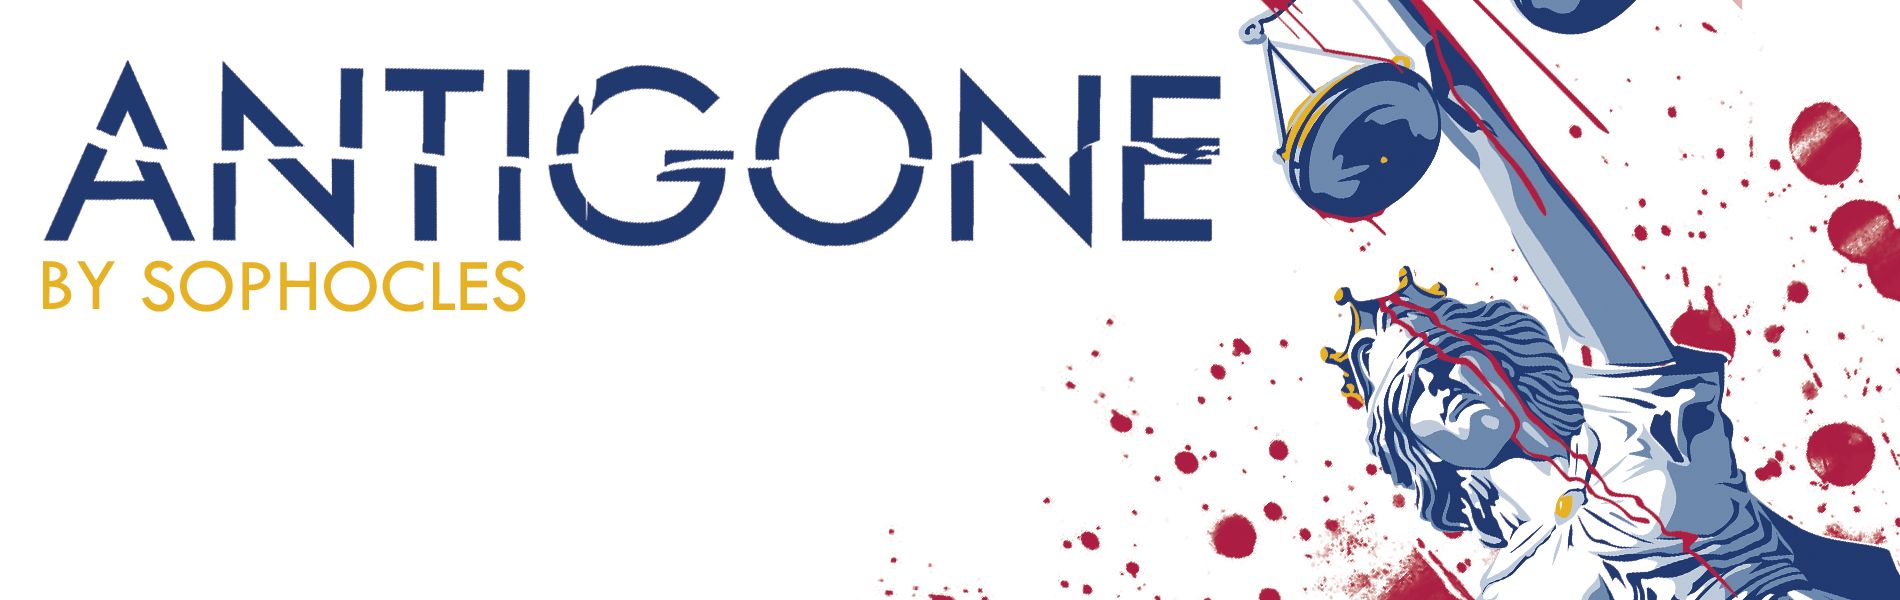 A graphic for Detroit Mercy Theatre Company's production of "Antigone" by Sophocles. Red and blue paint-like blobs are splattered on white background - an image of a statue of a woman holding a balance scale is in the right side of the graphic.